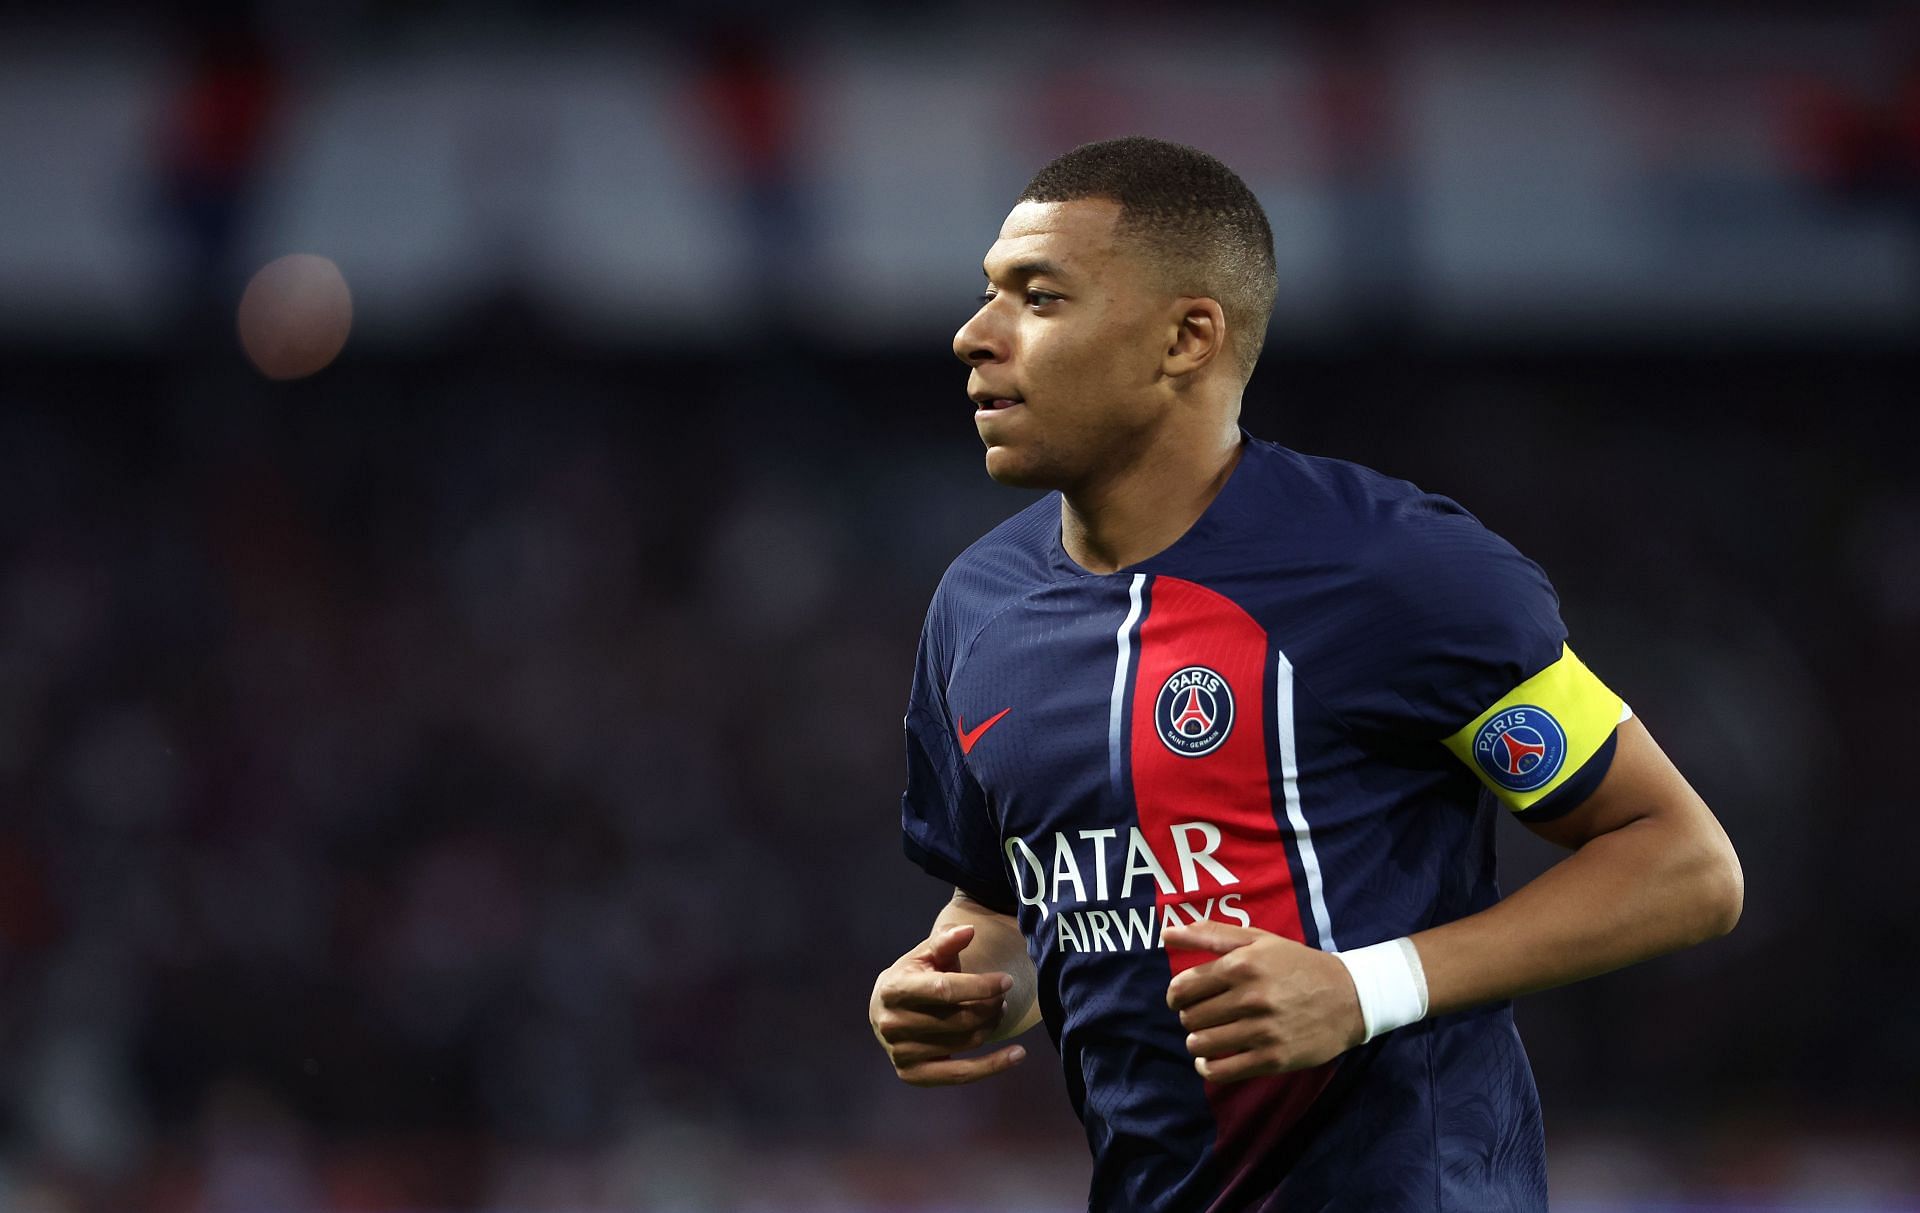 Kylian Mbappe could leave Paris this summer.